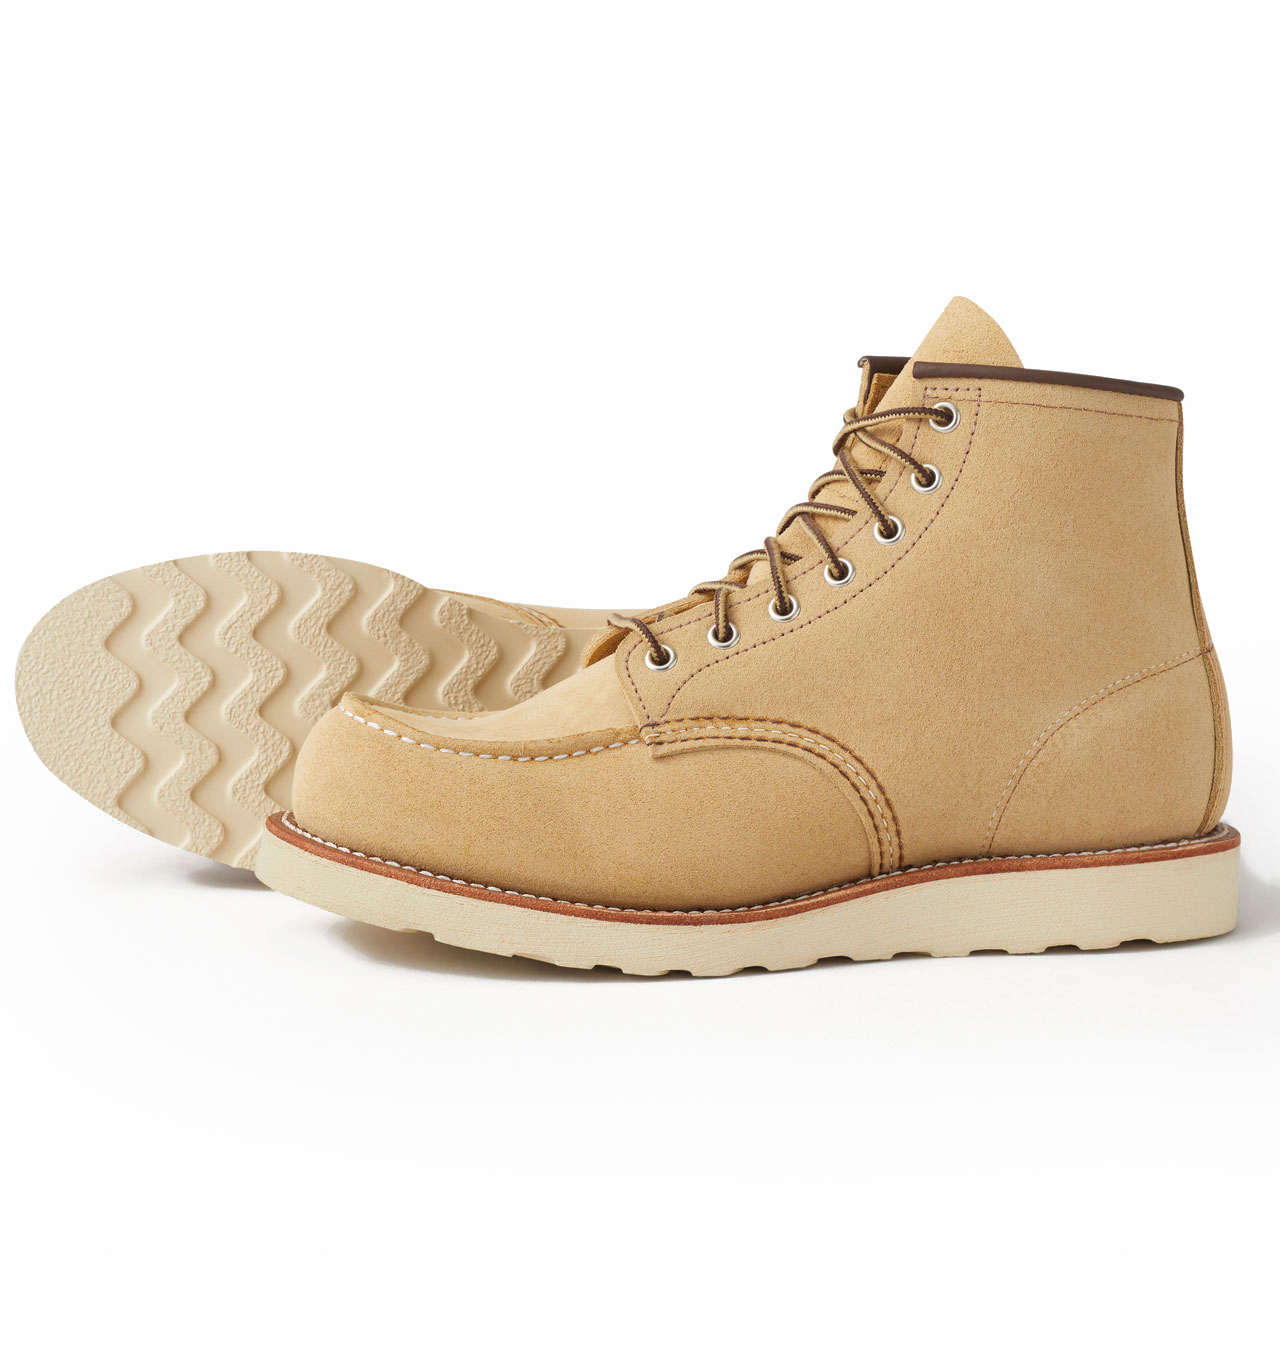 Red Wing Shoes 8833 6-inch Moc Toe - Hawthorne Abilene LIMITED